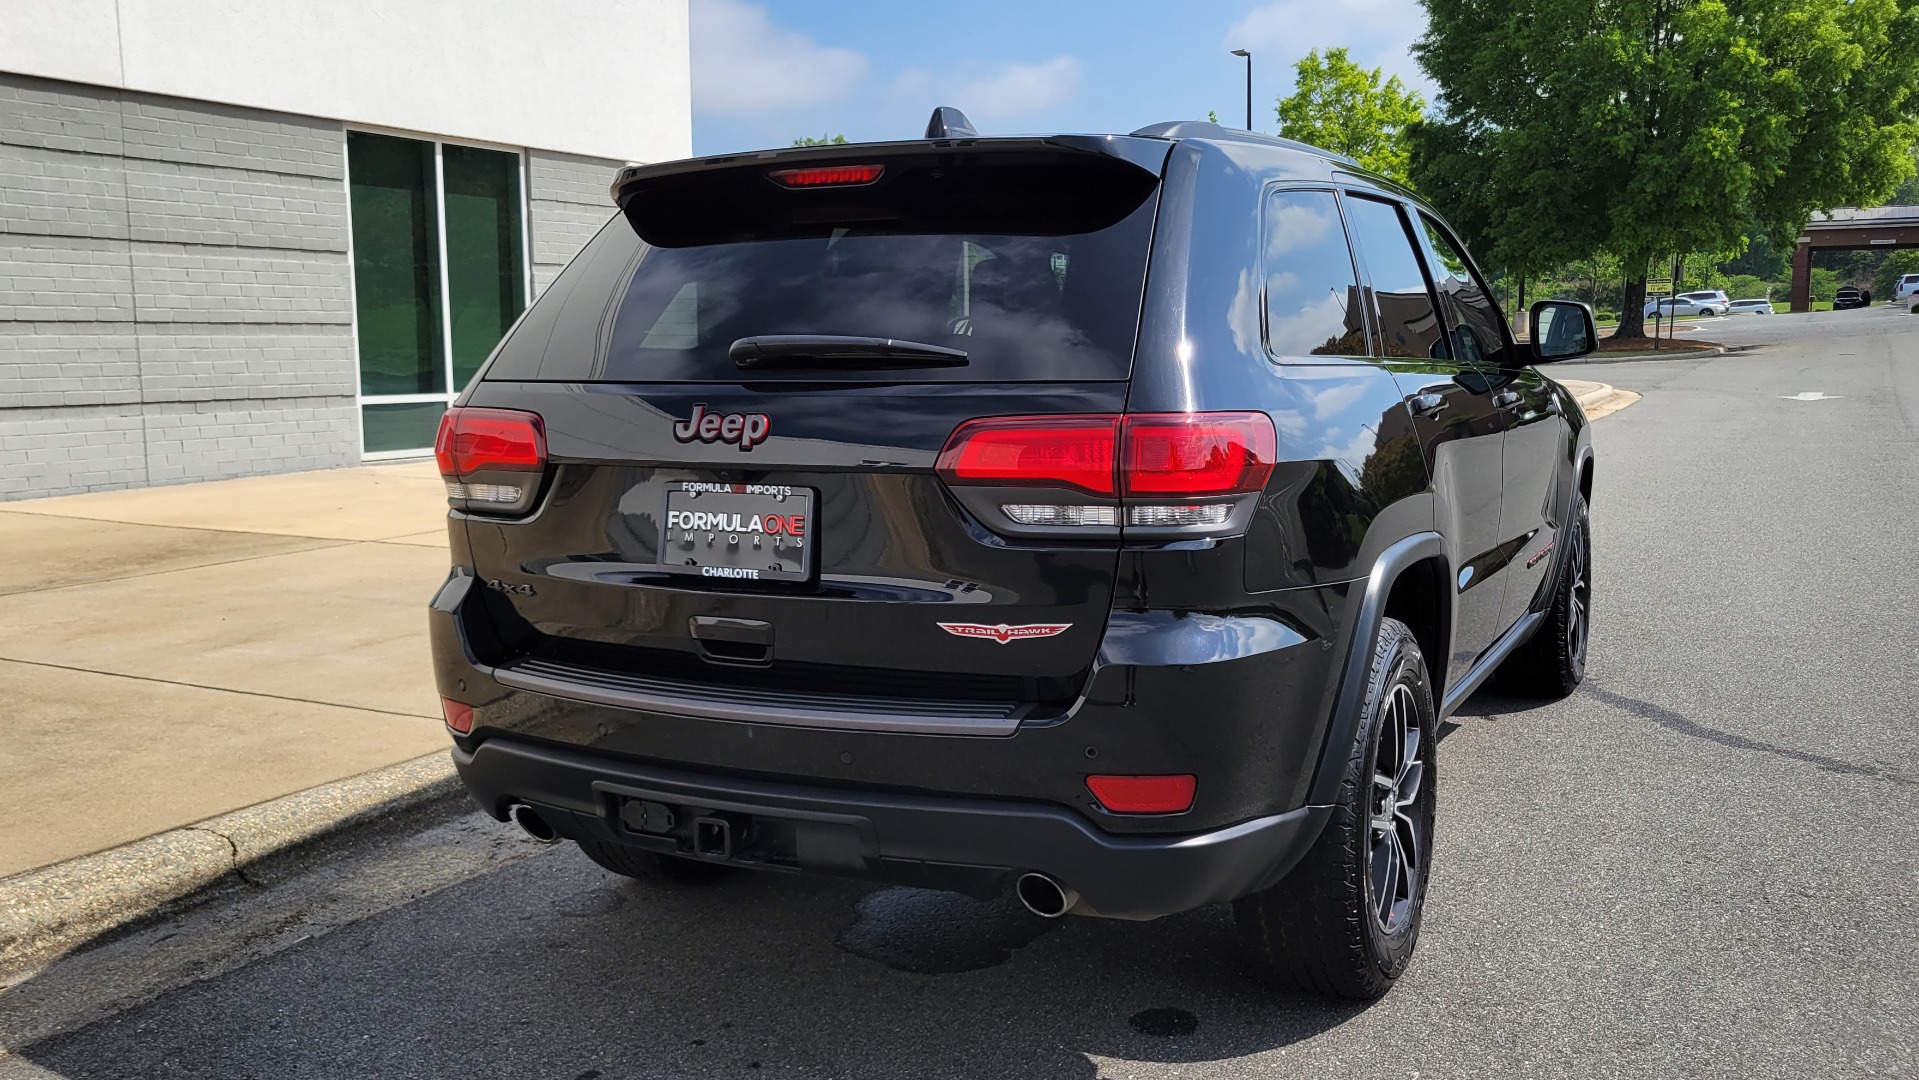 Used 2018 Jeep GRAND CHEROKEE TRAILHAWK 4X4 / 3.6L / NAV / BLIND SPOT / REARVIEW for sale $38,000 at Formula Imports in Charlotte NC 28227 8